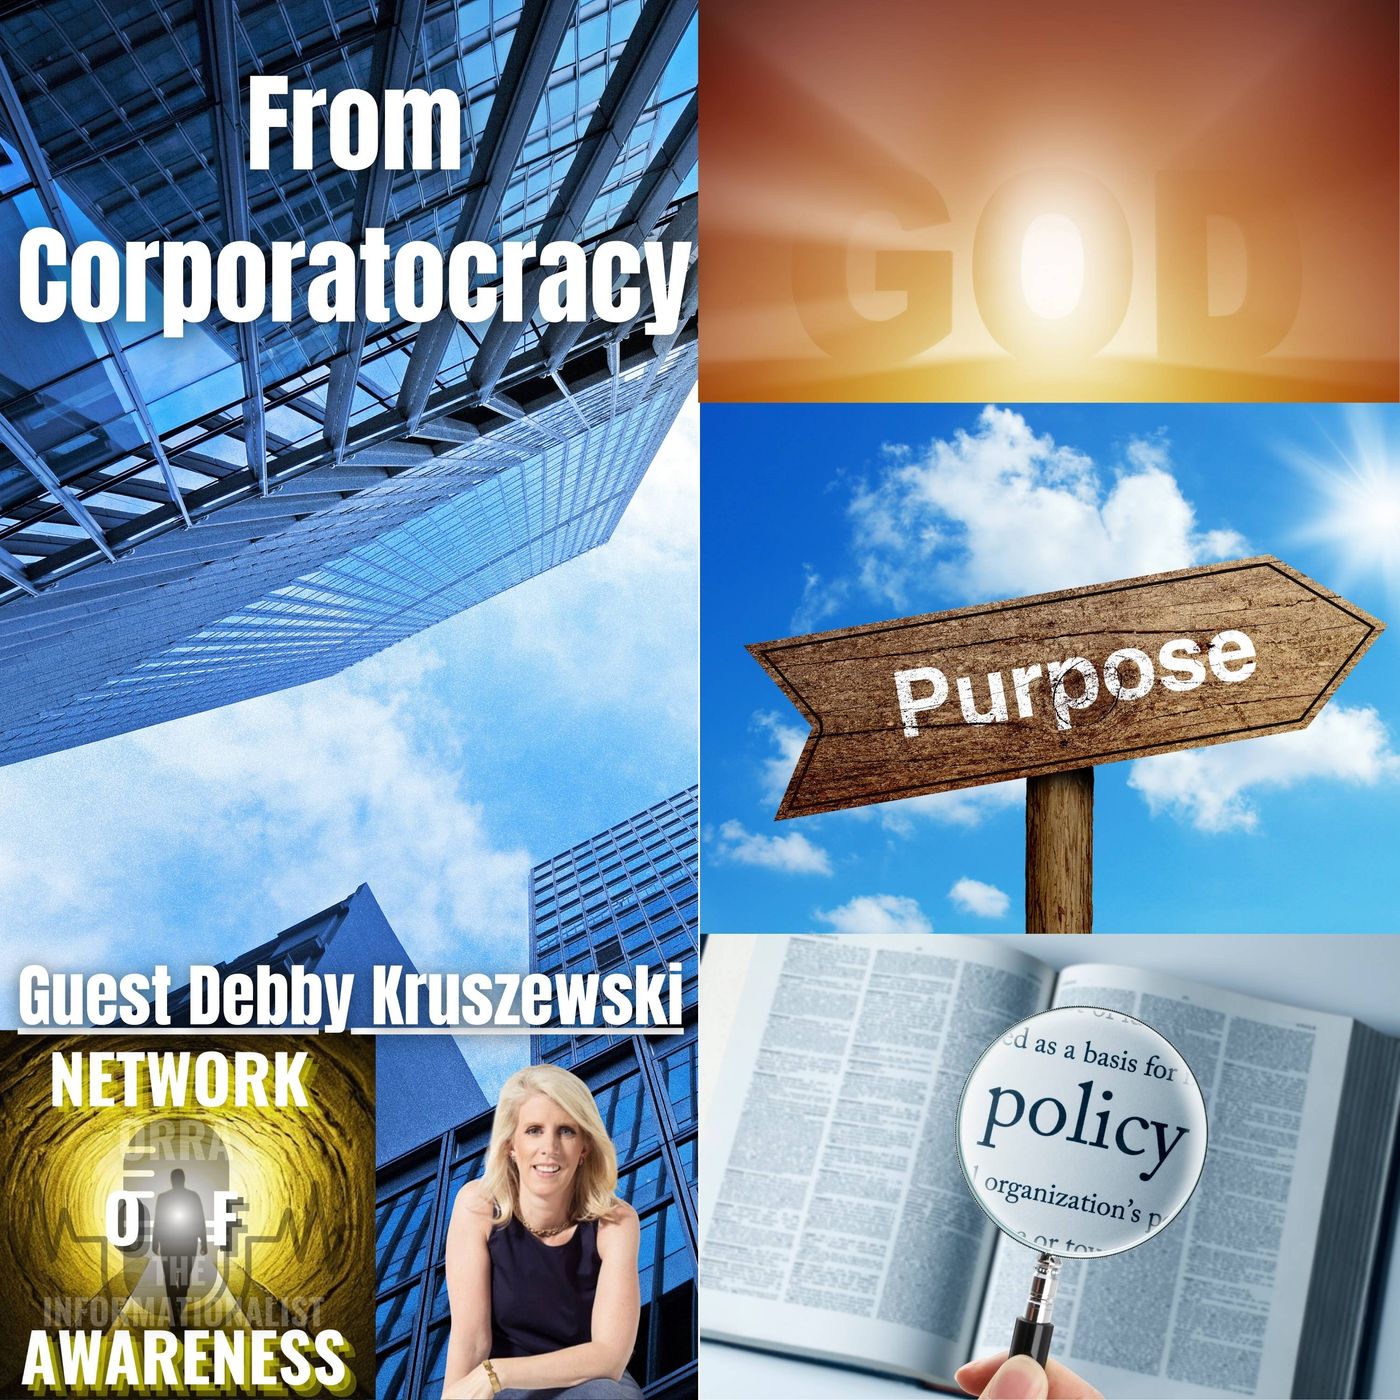 From Corporatocracy to God's Purpose Policy